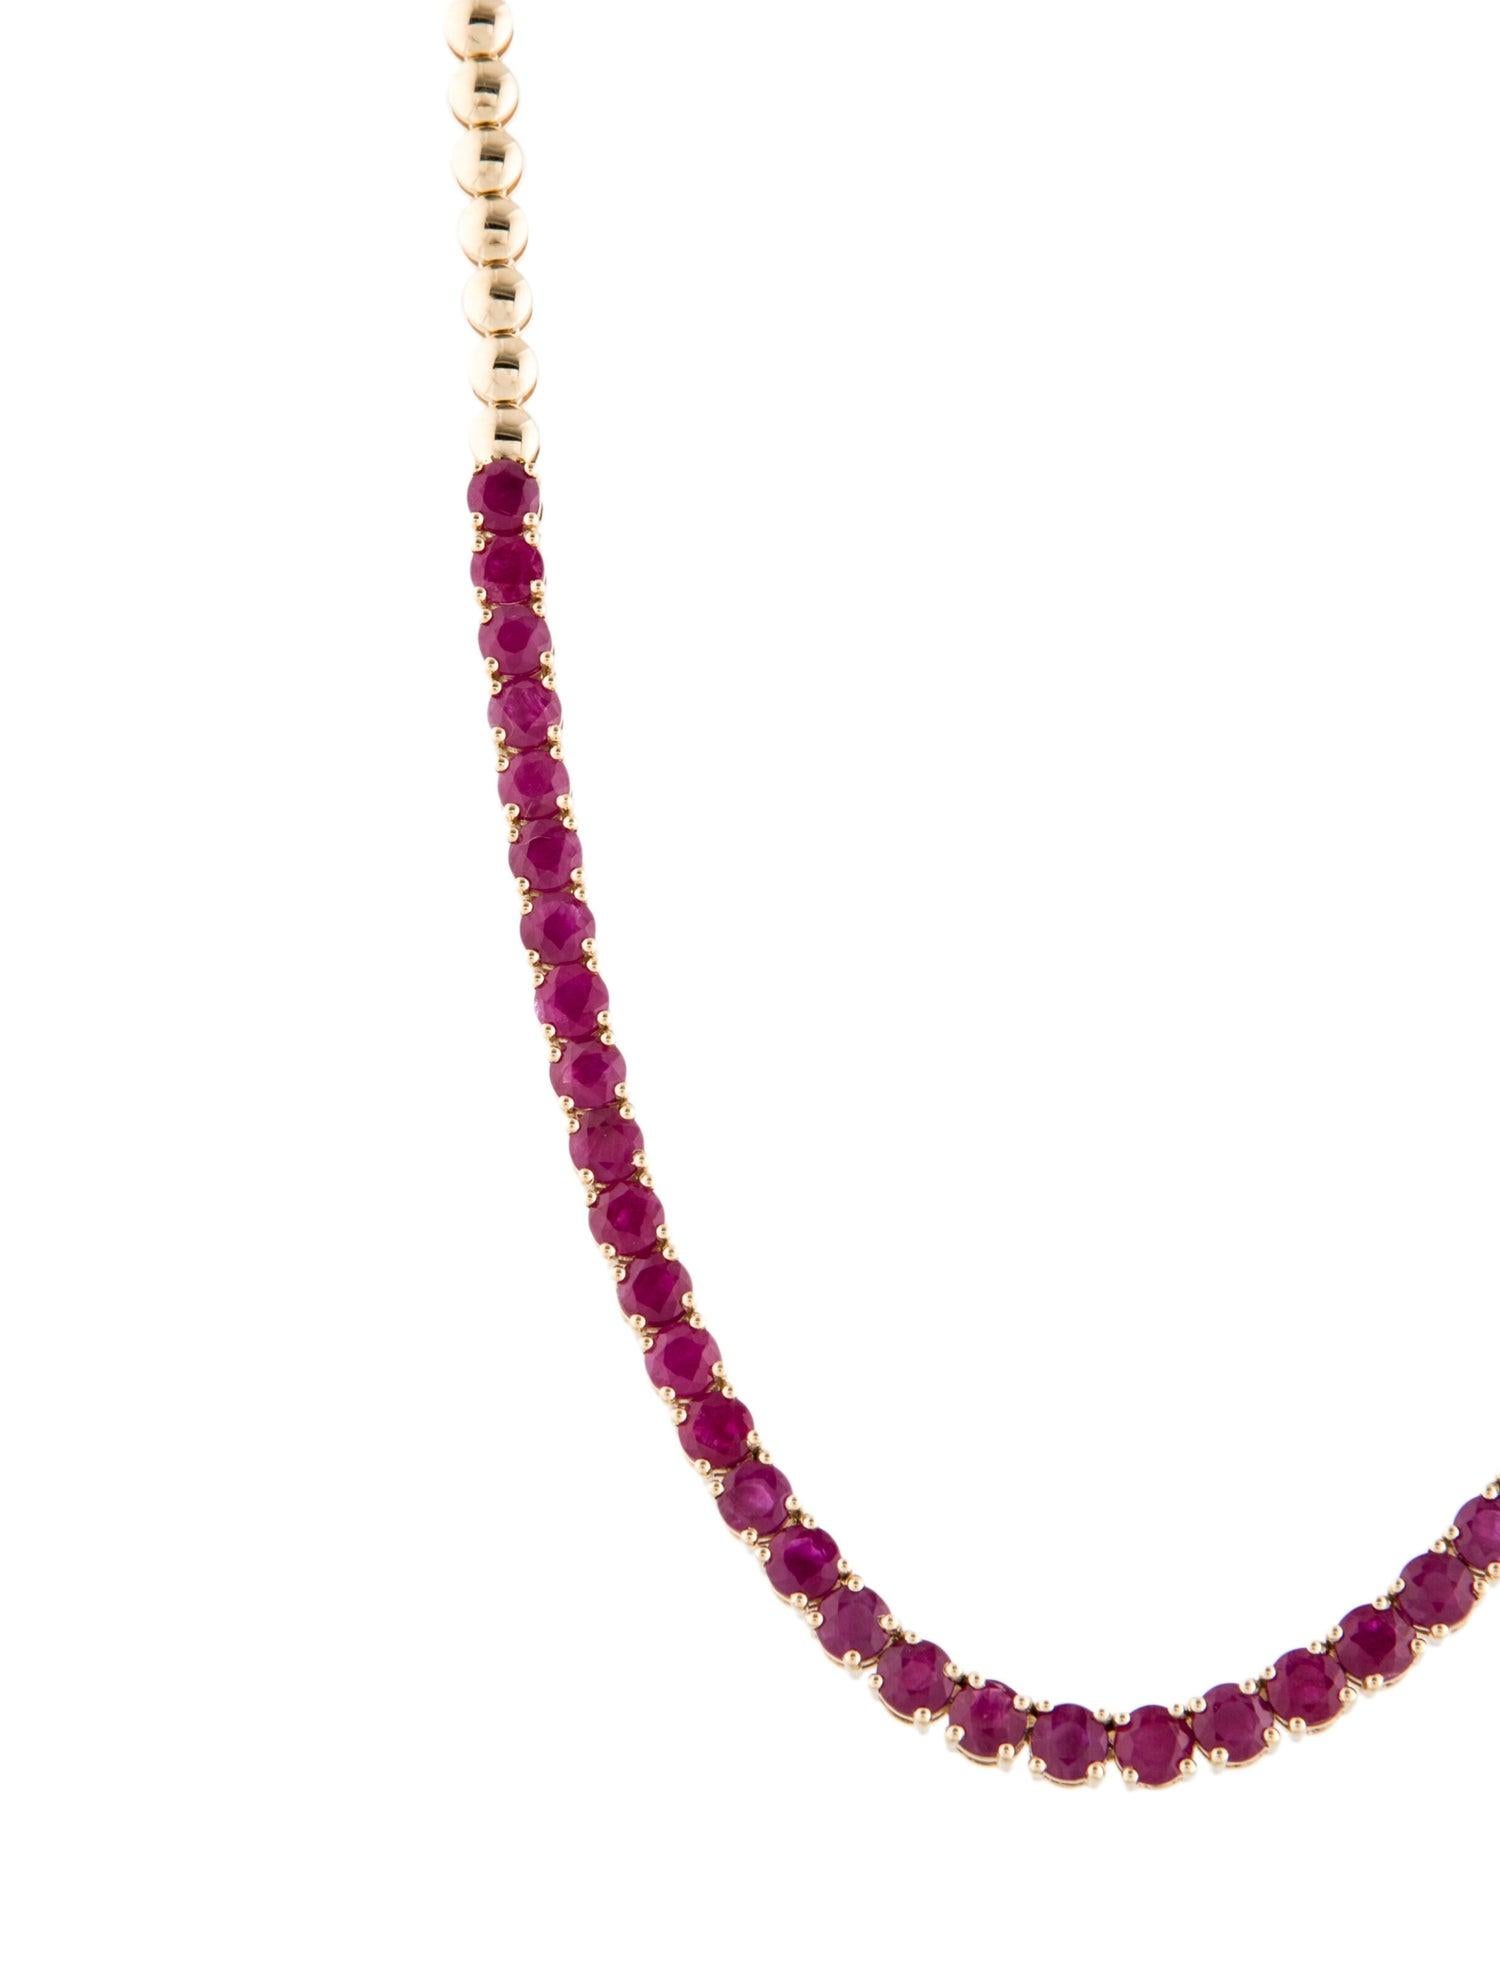 Brilliant Cut 14K Ruby Chain Necklace 15.92ctw - Luxurious Jewelry Piece for Timeless Elegance For Sale